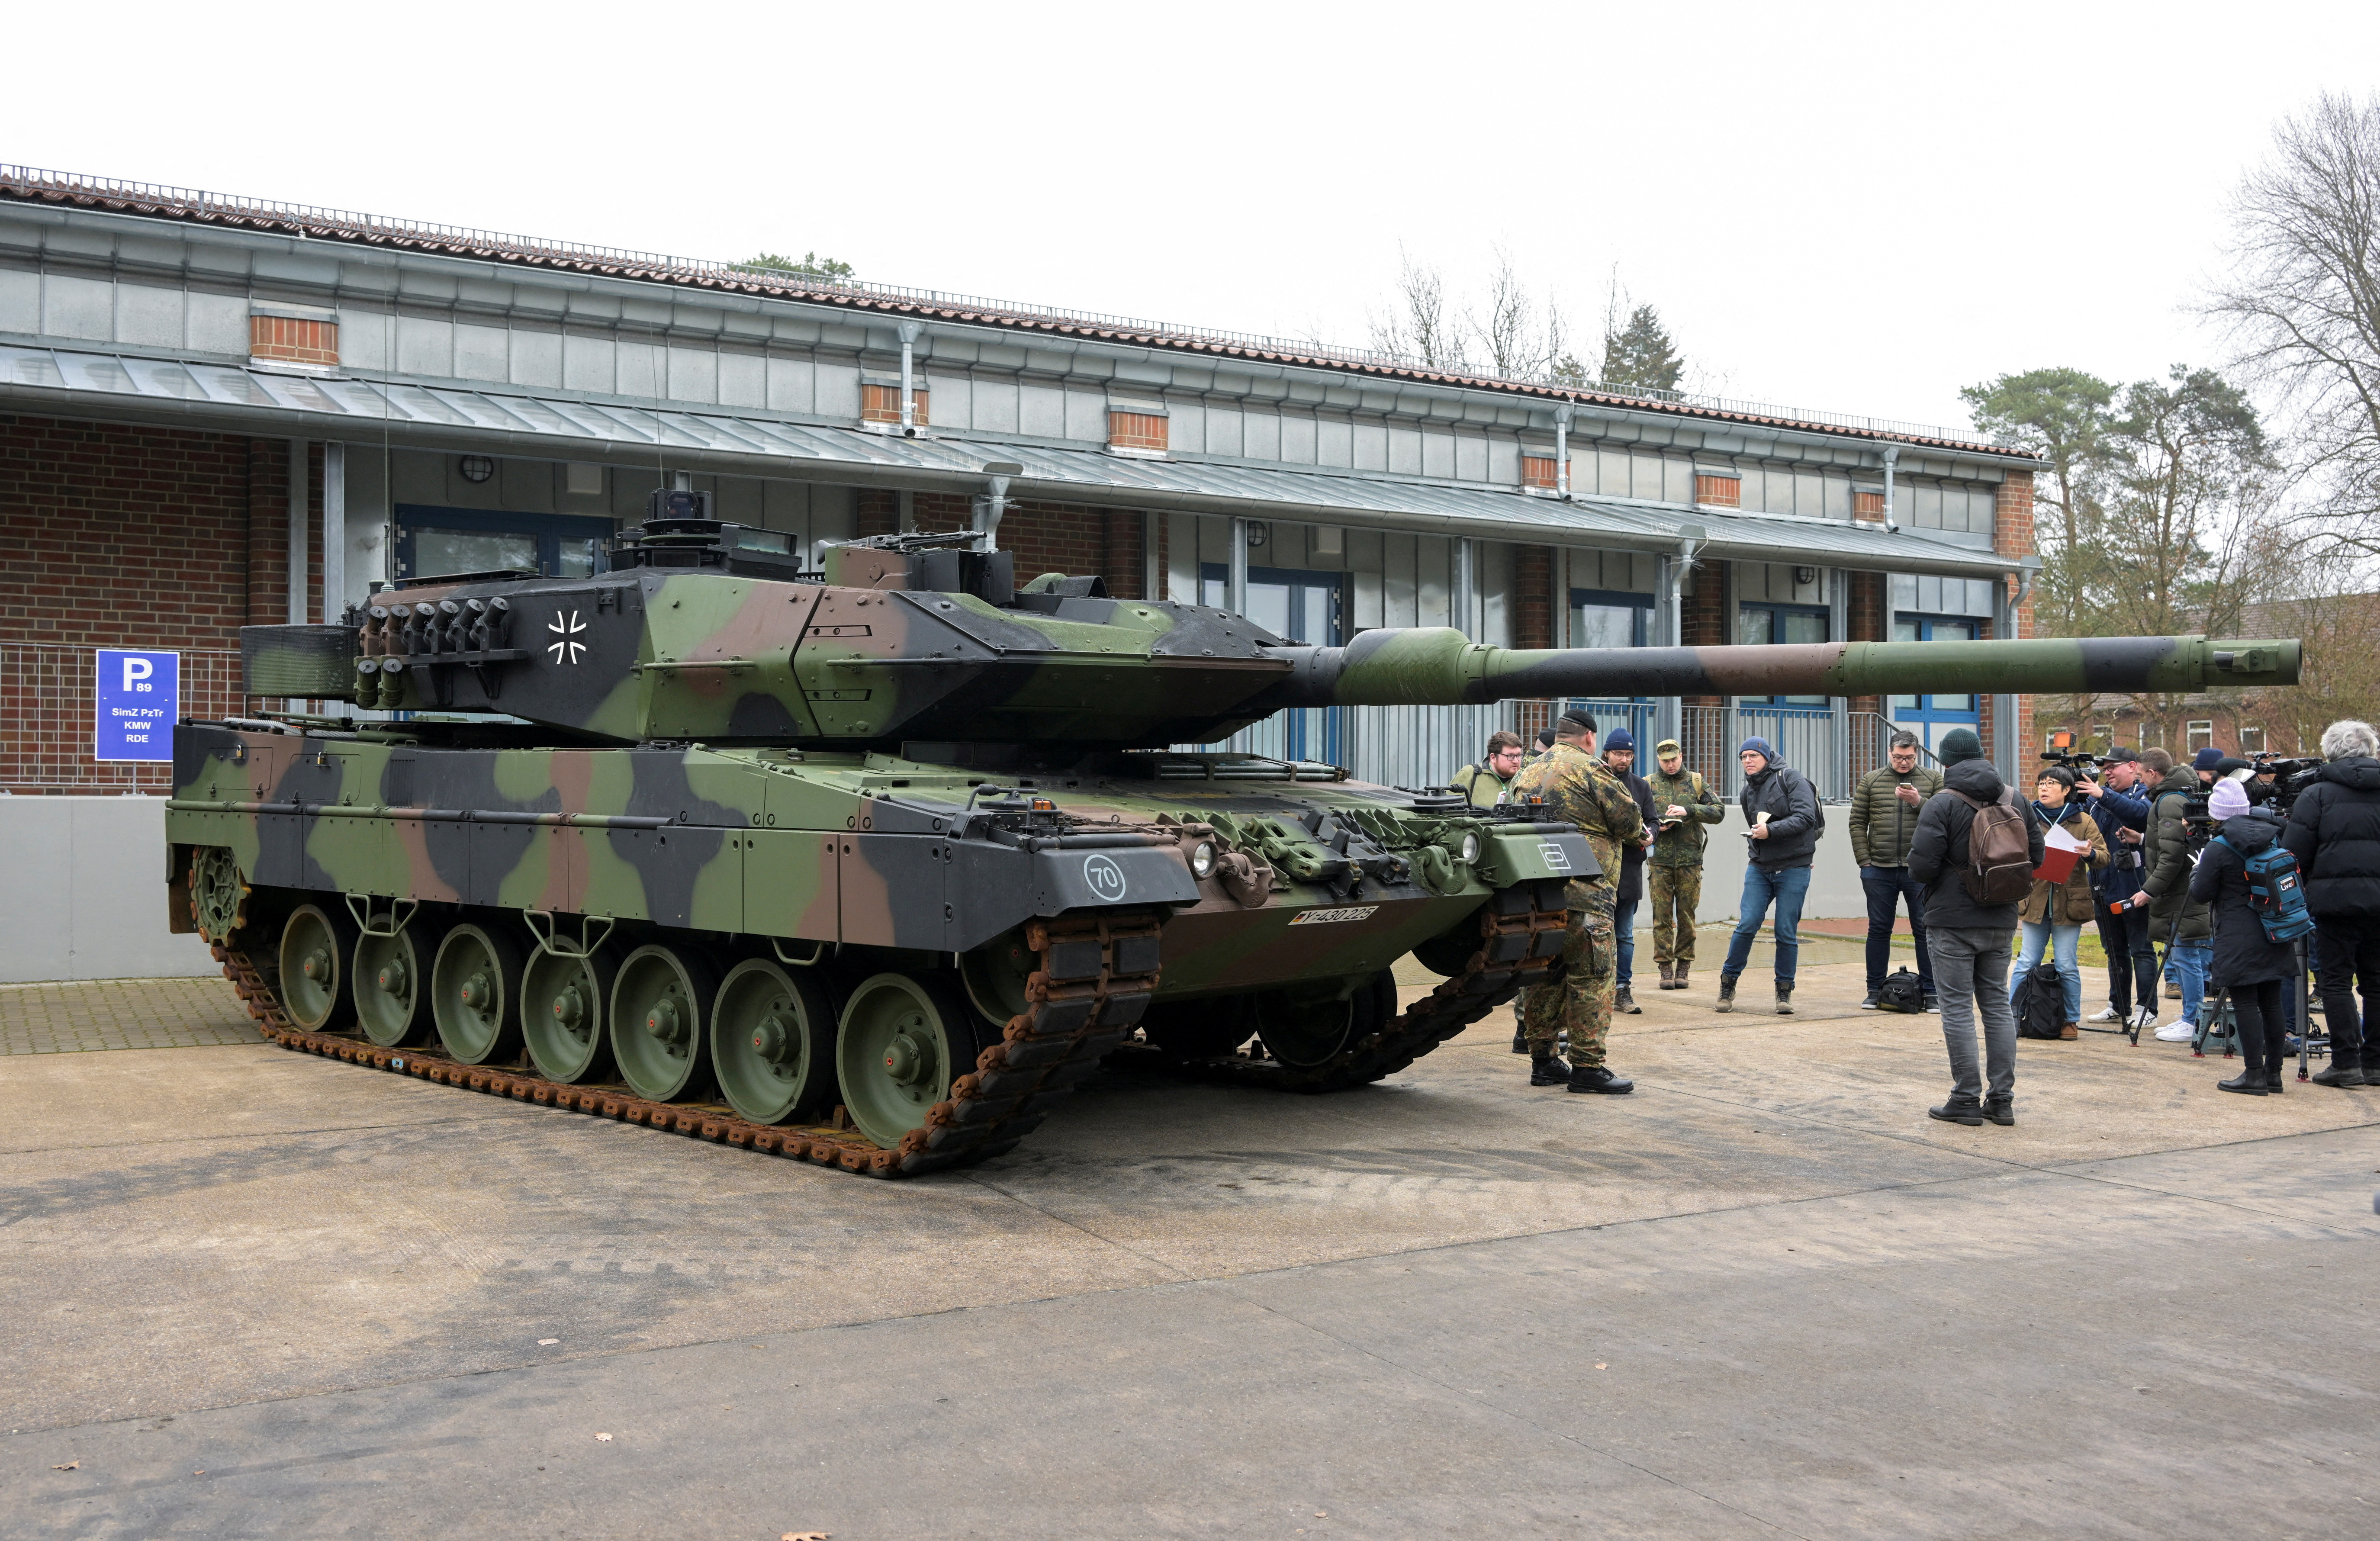 German defence contractors in legal fight over Leopard 2 battle tank